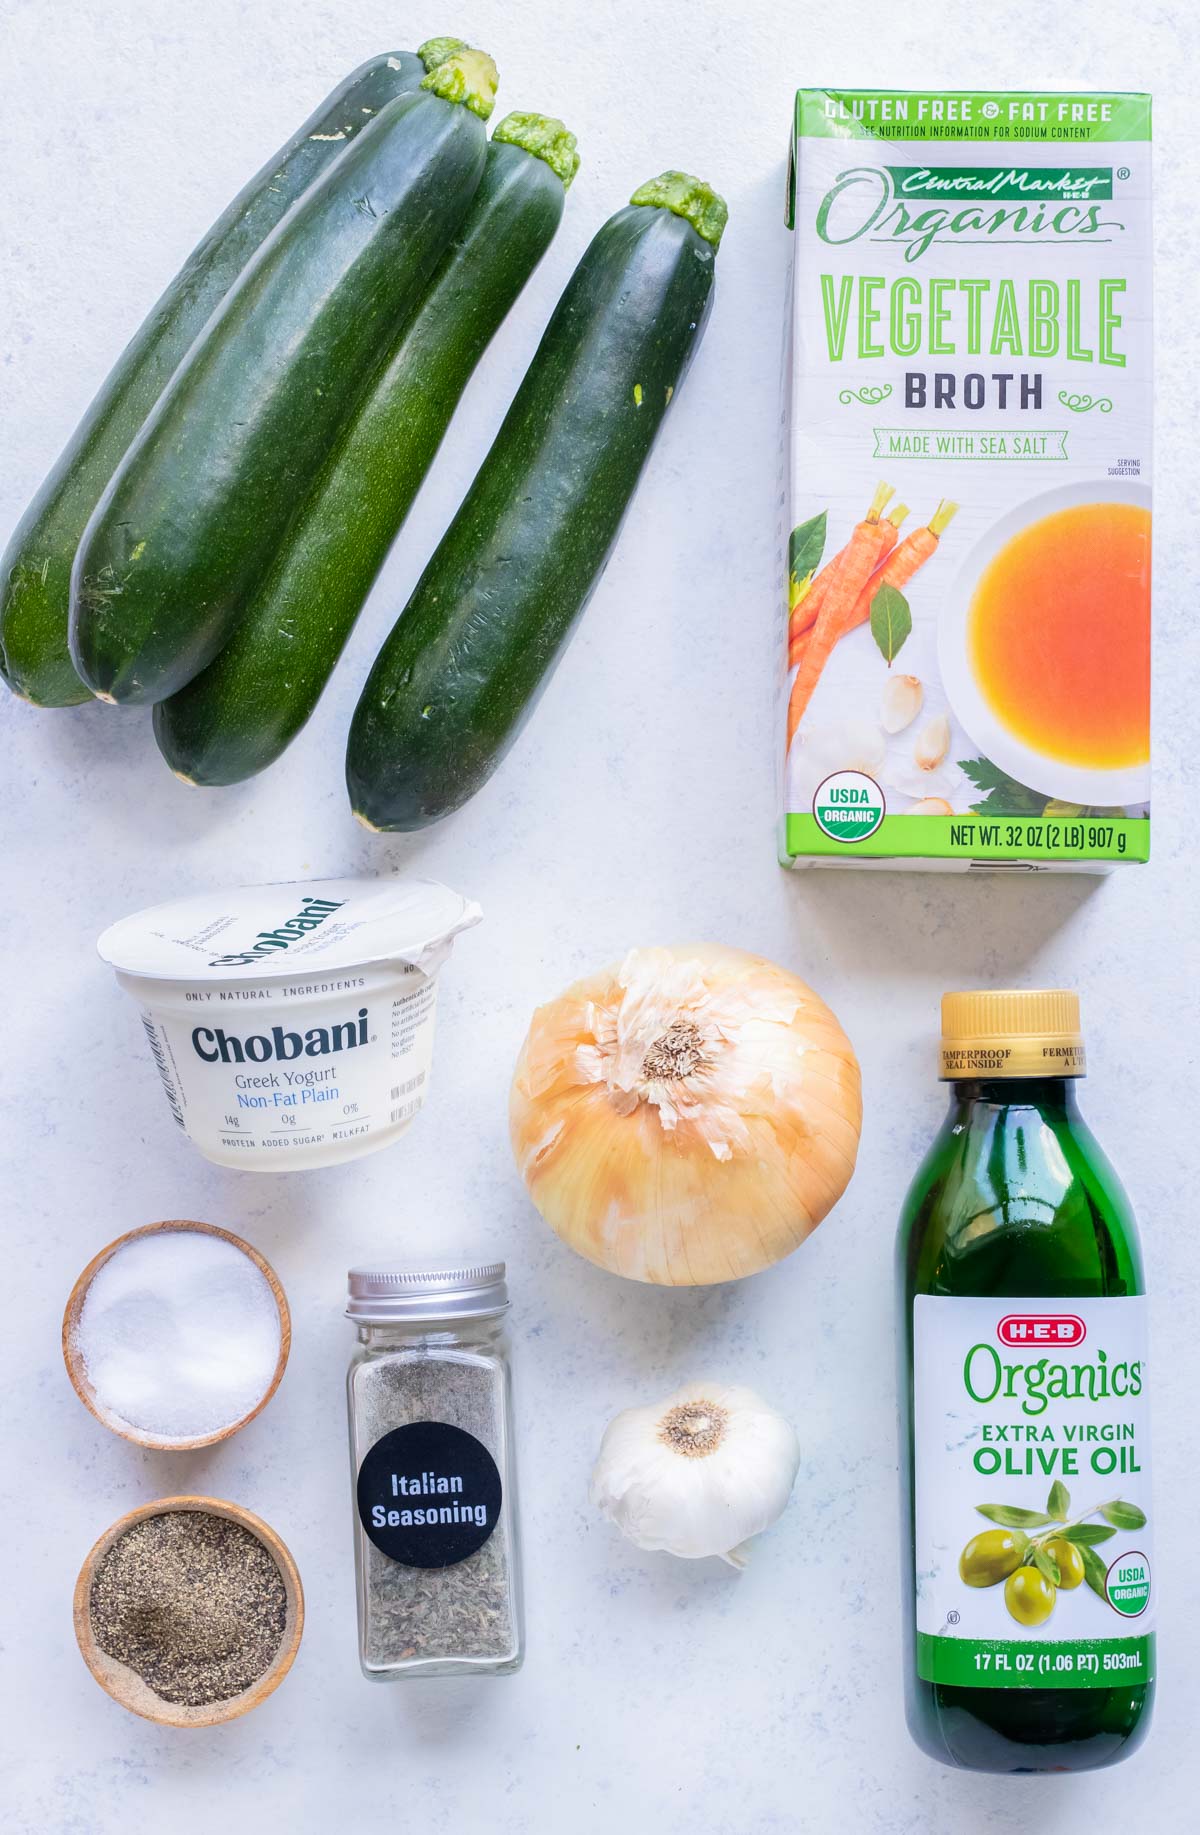 Zucchini, broth, yogurt, onions, seasoning, and oil are the ingredients used for this soup.